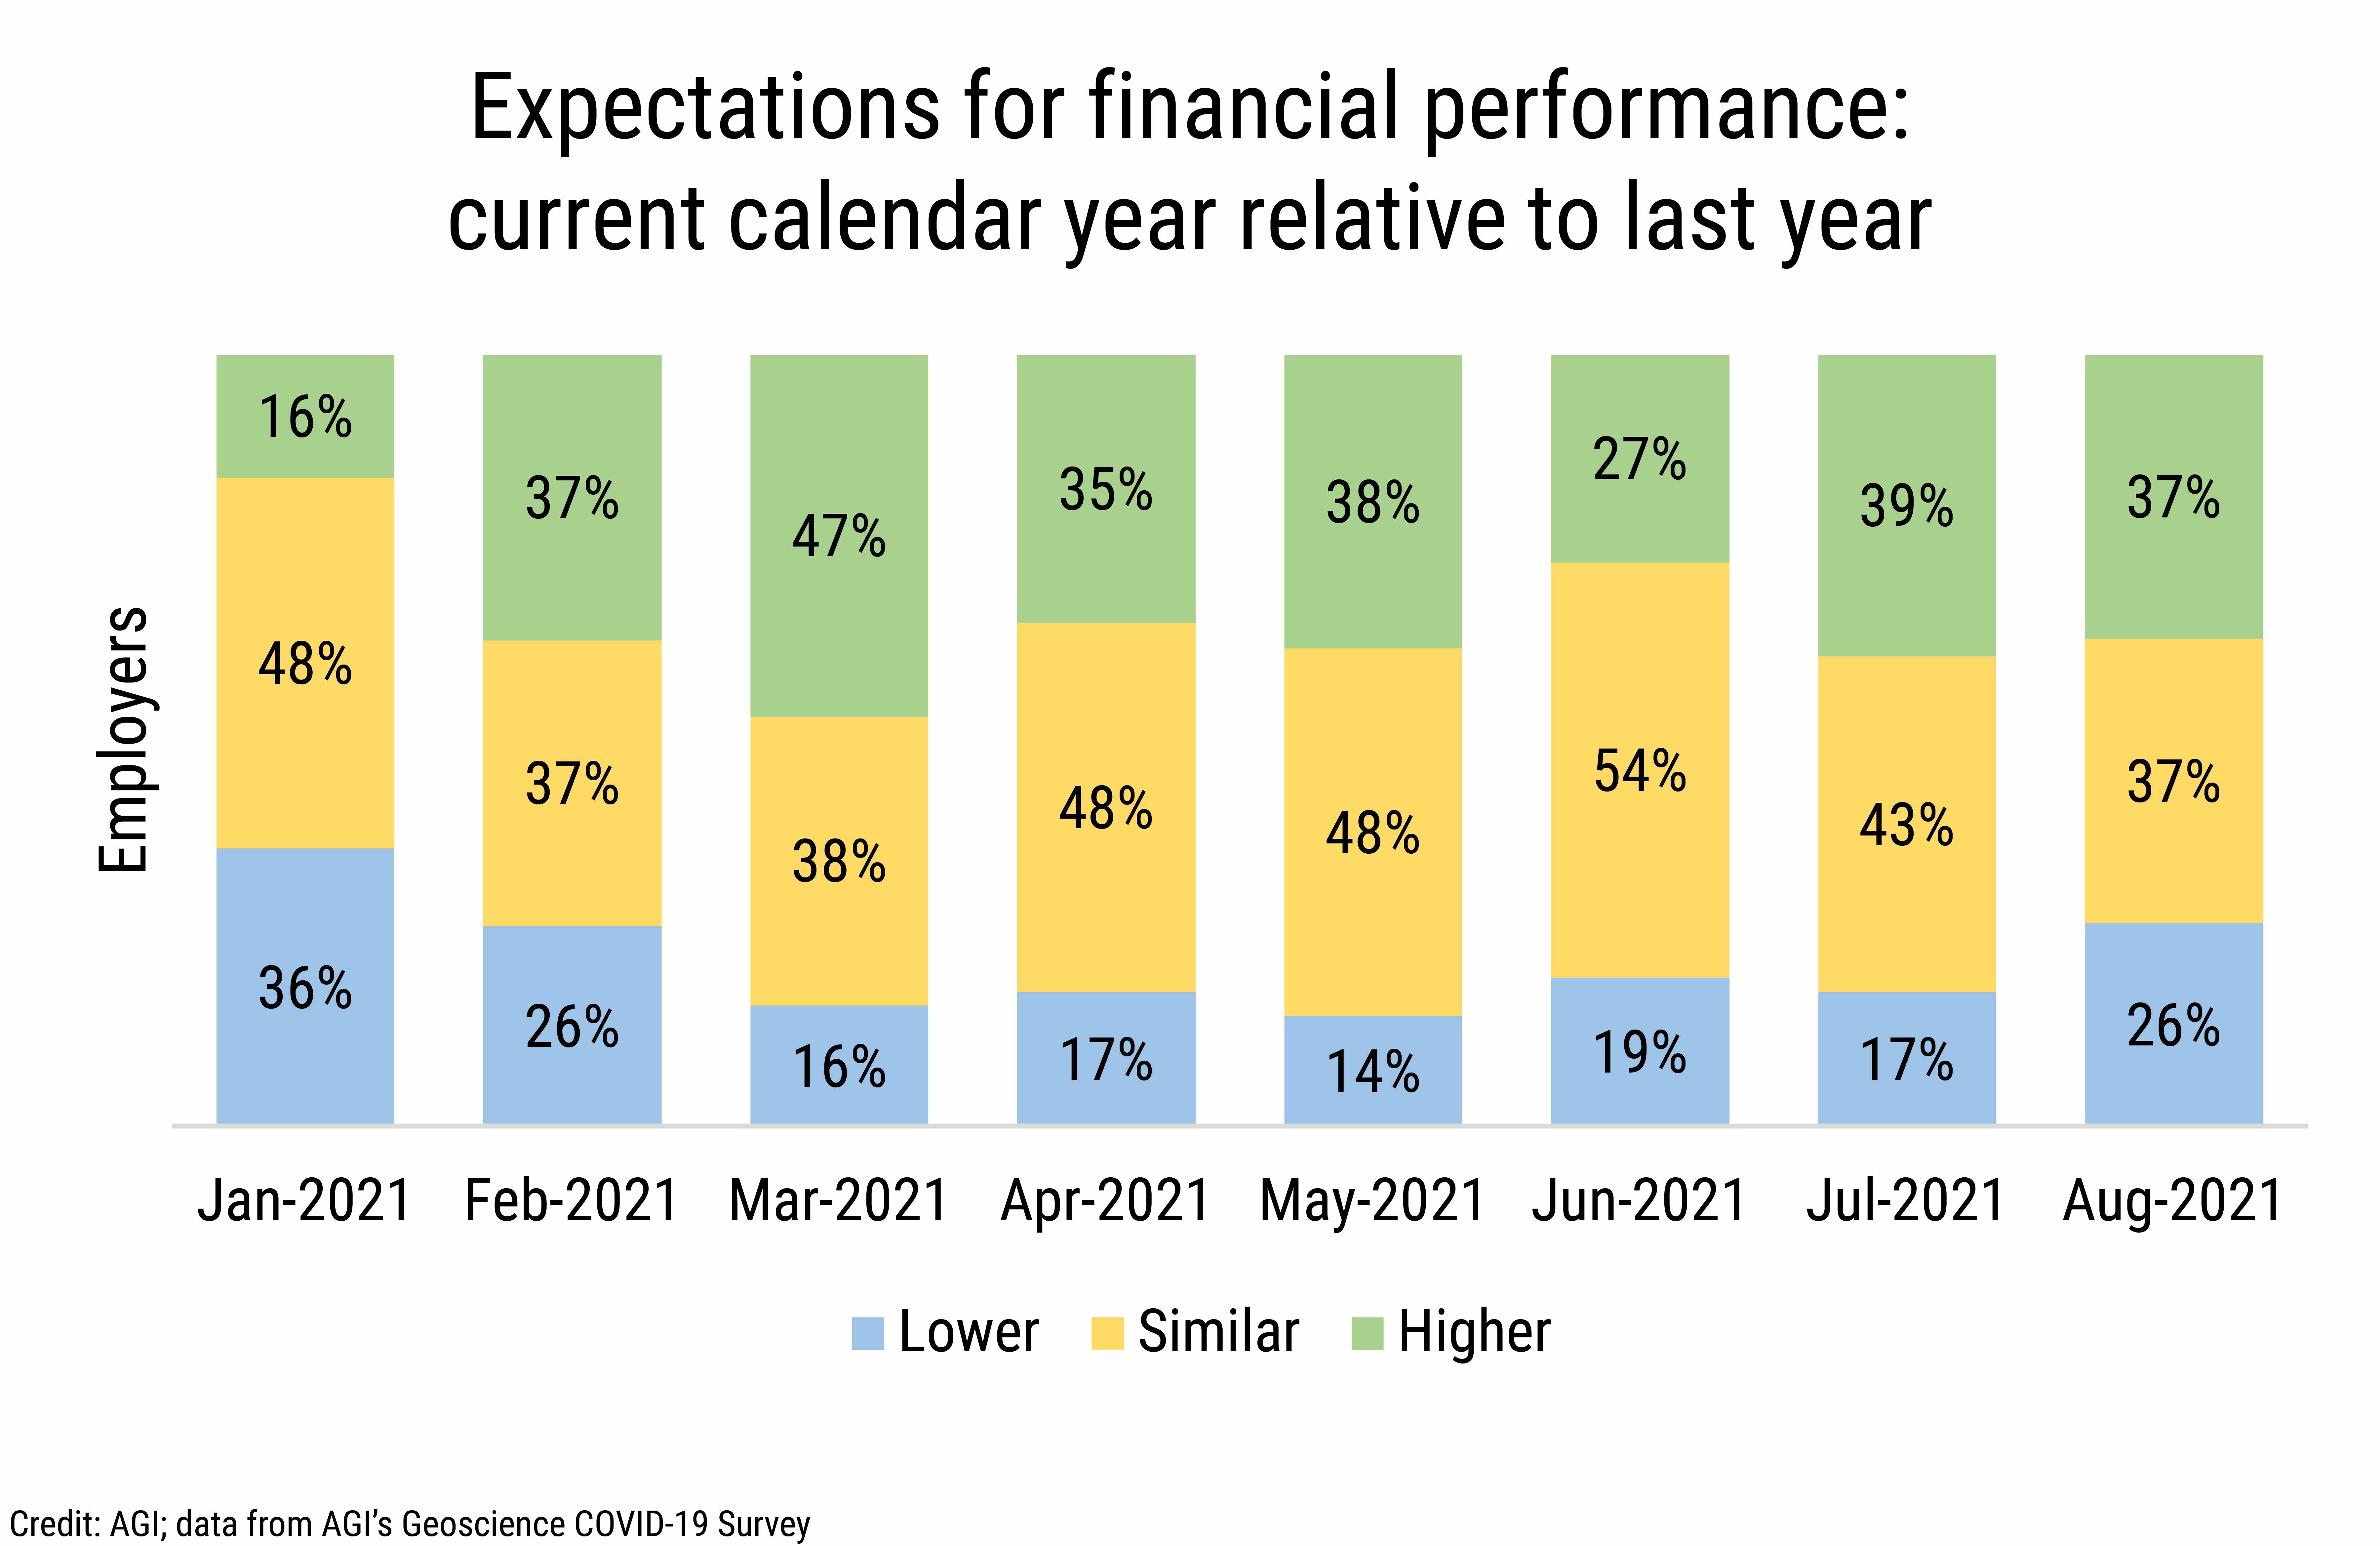 DB_2021-029 chart 01: Expectations for financial performance: current calendar year relative to last year (Credit: AGI; data from AGI's Geoscience COVID-19 Survey)